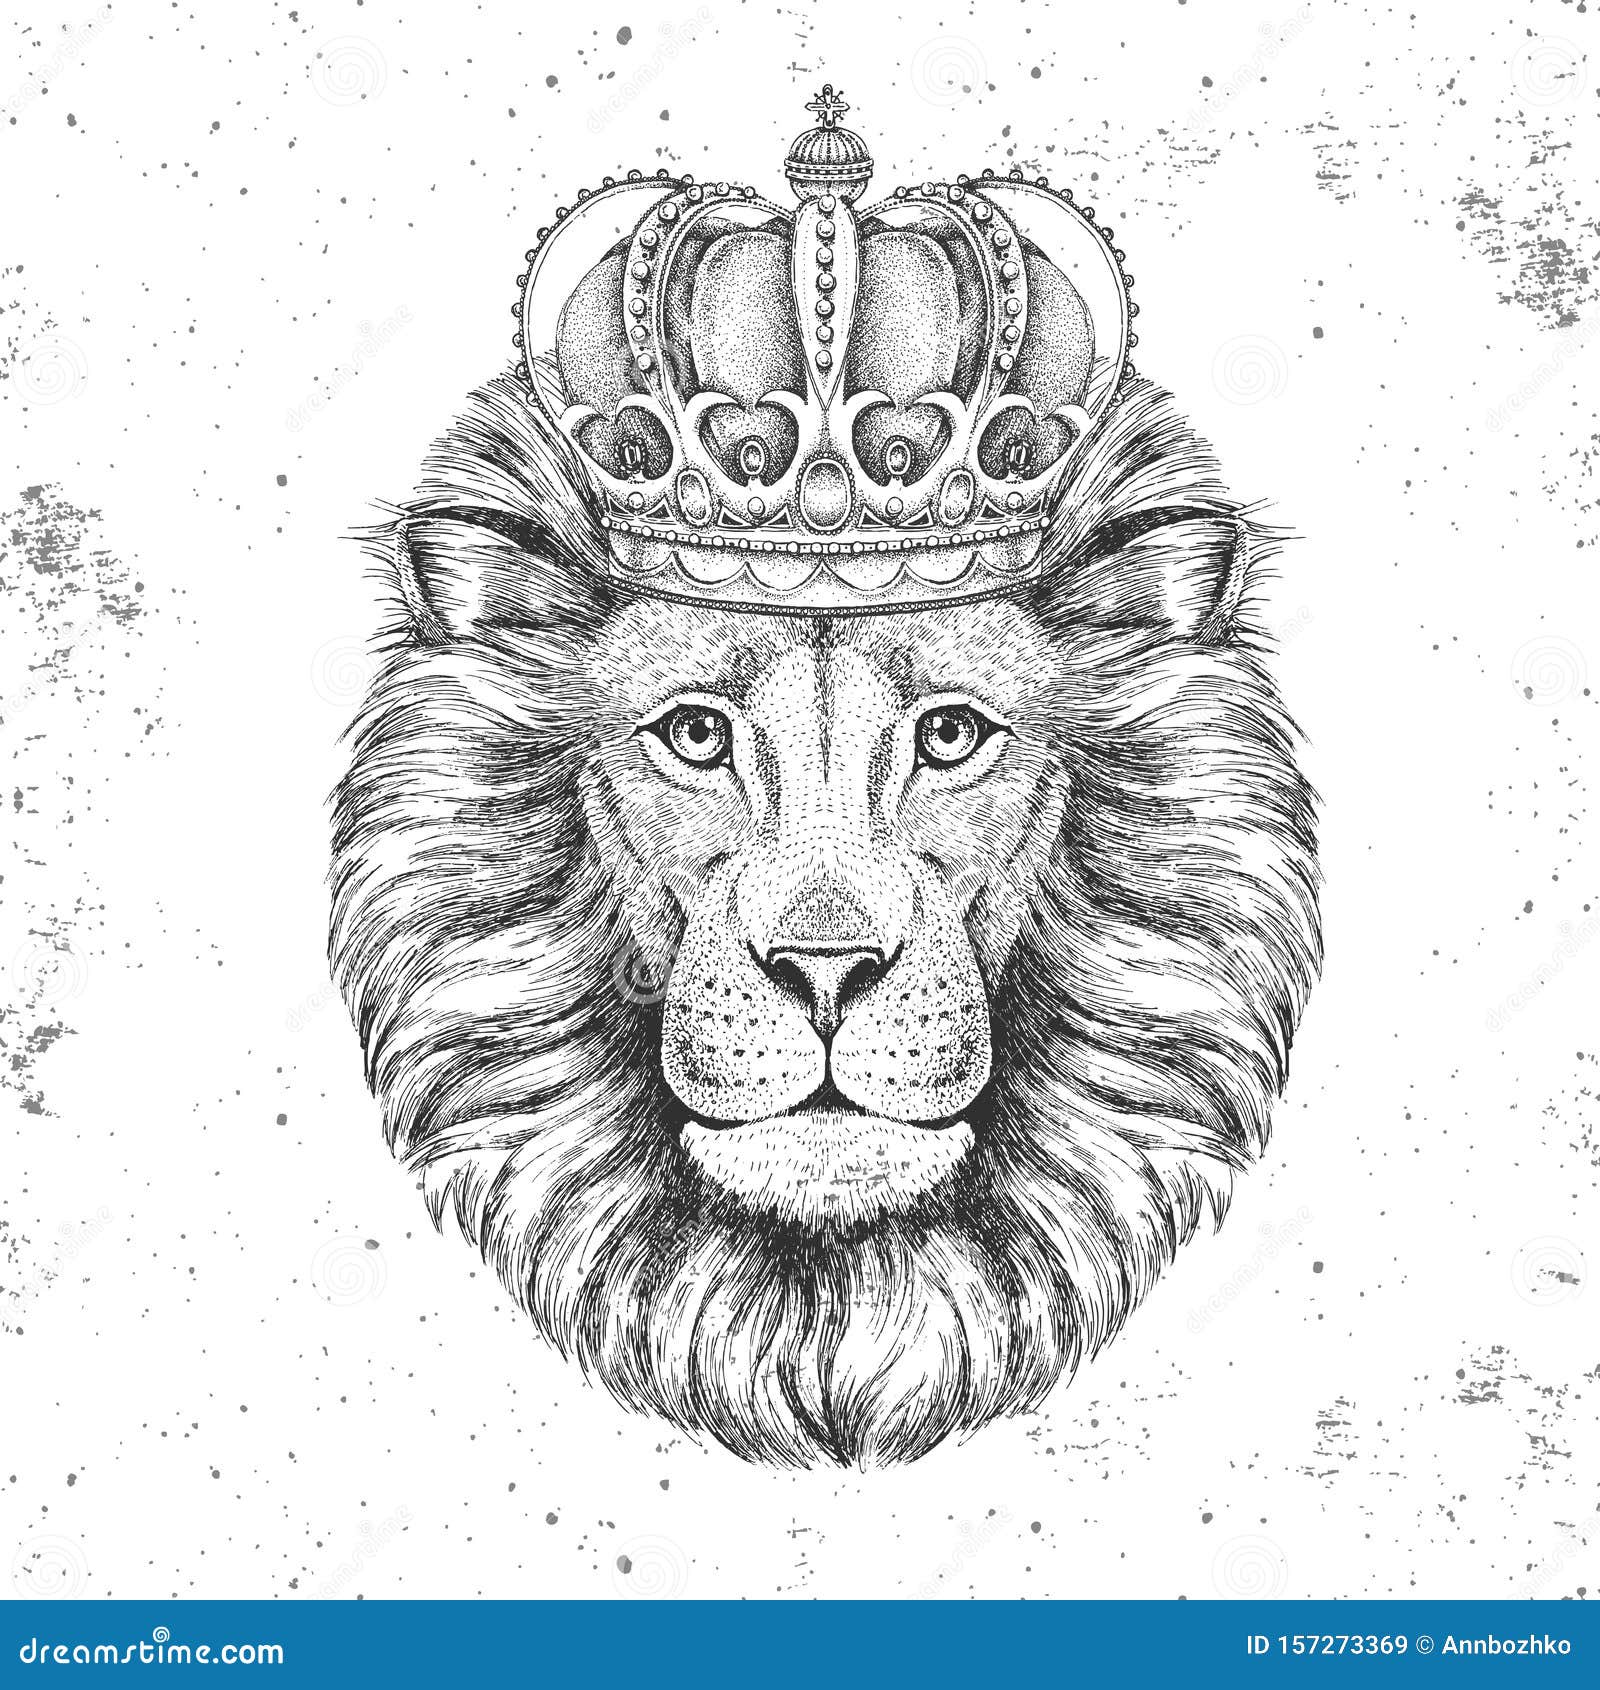 Hipster Animal Lion In Crown. 